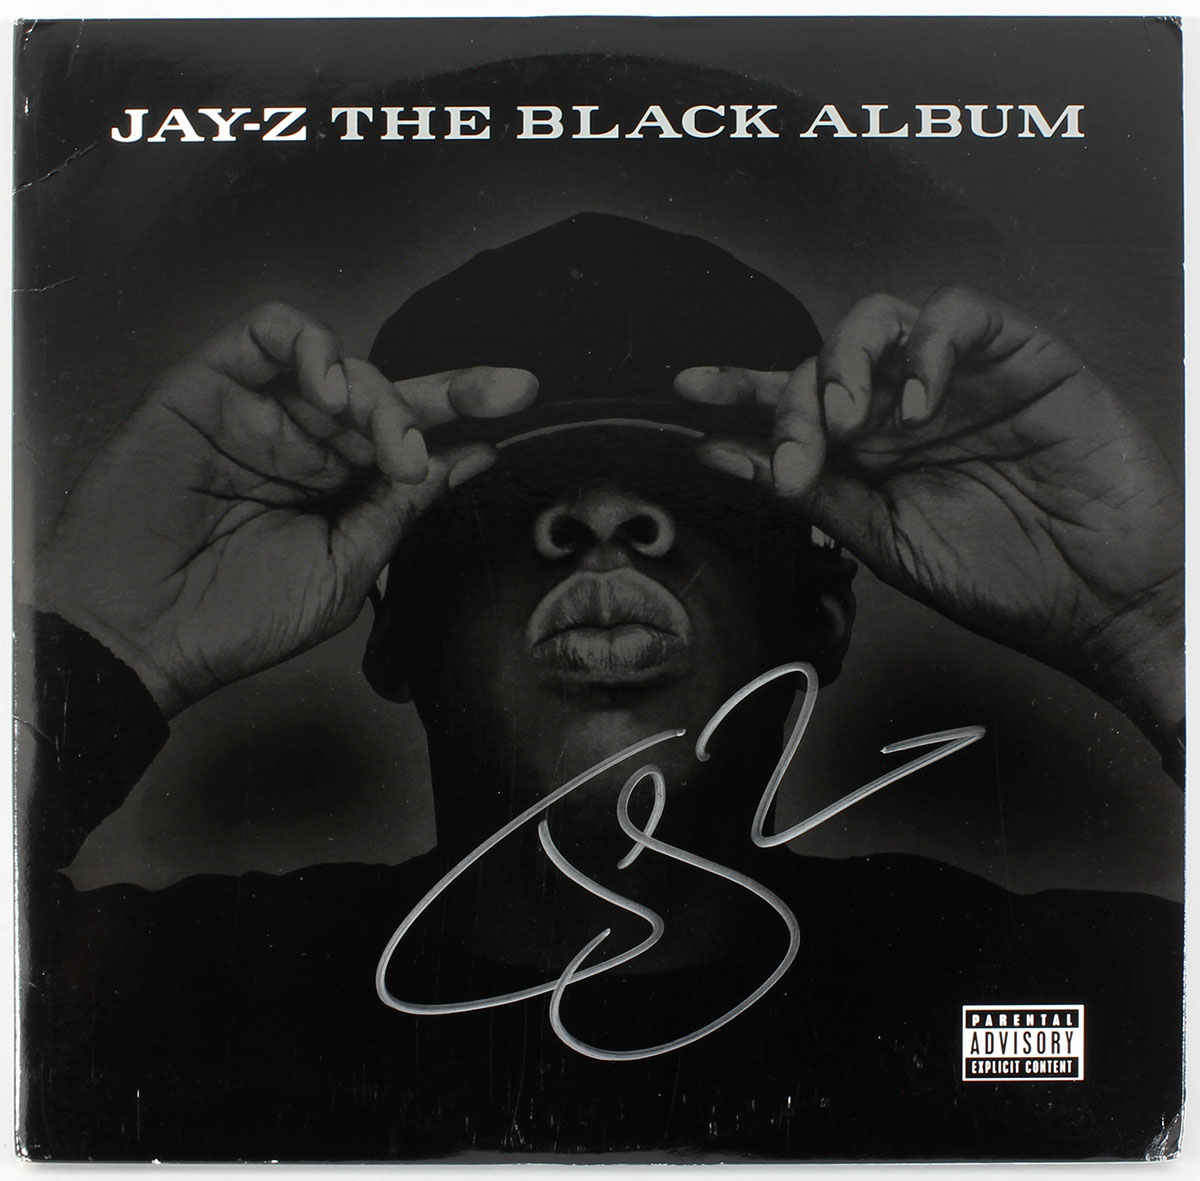 ow many times did jay z the black album go platinum